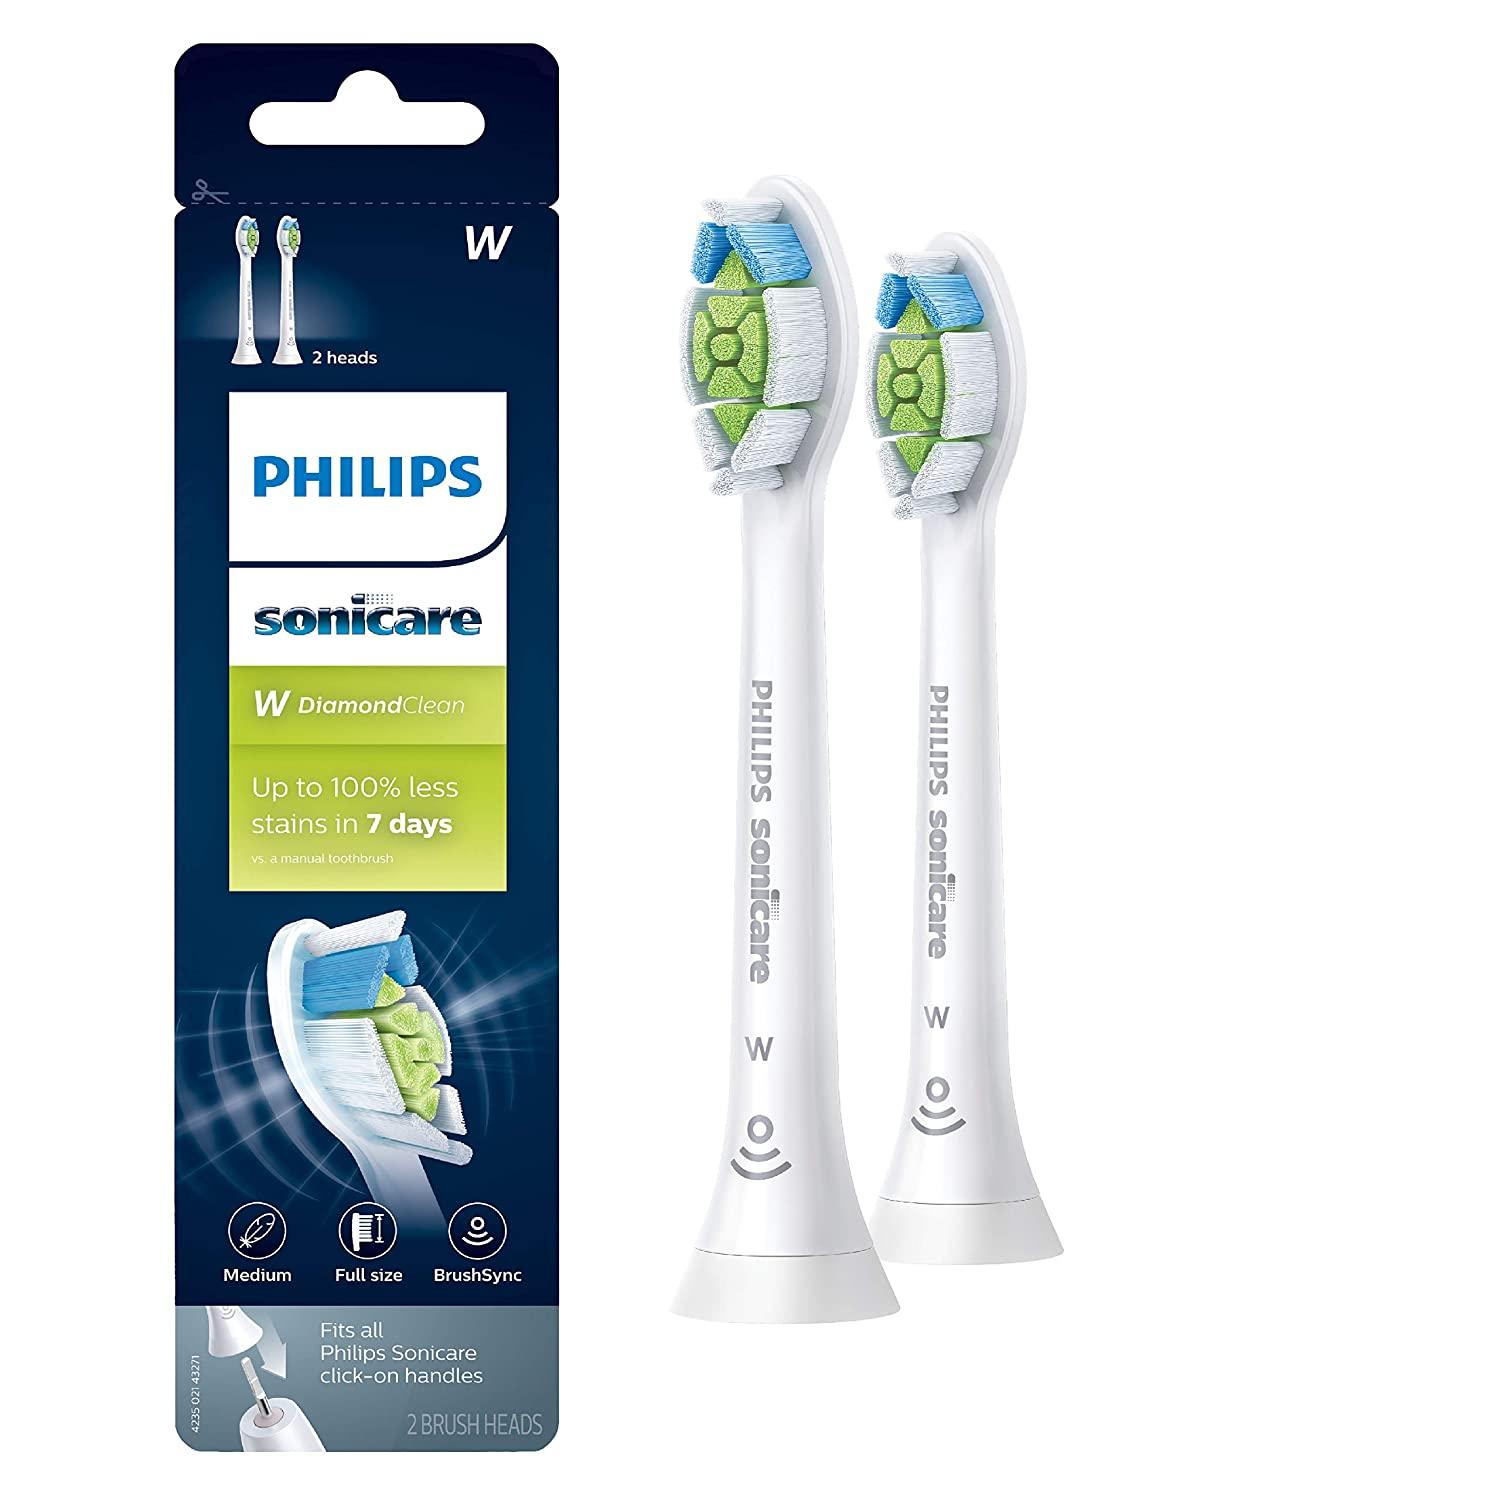 2 Philips Sonicare W DiamondClean Replacement Toothbrush Heads for $15.19 Shipped